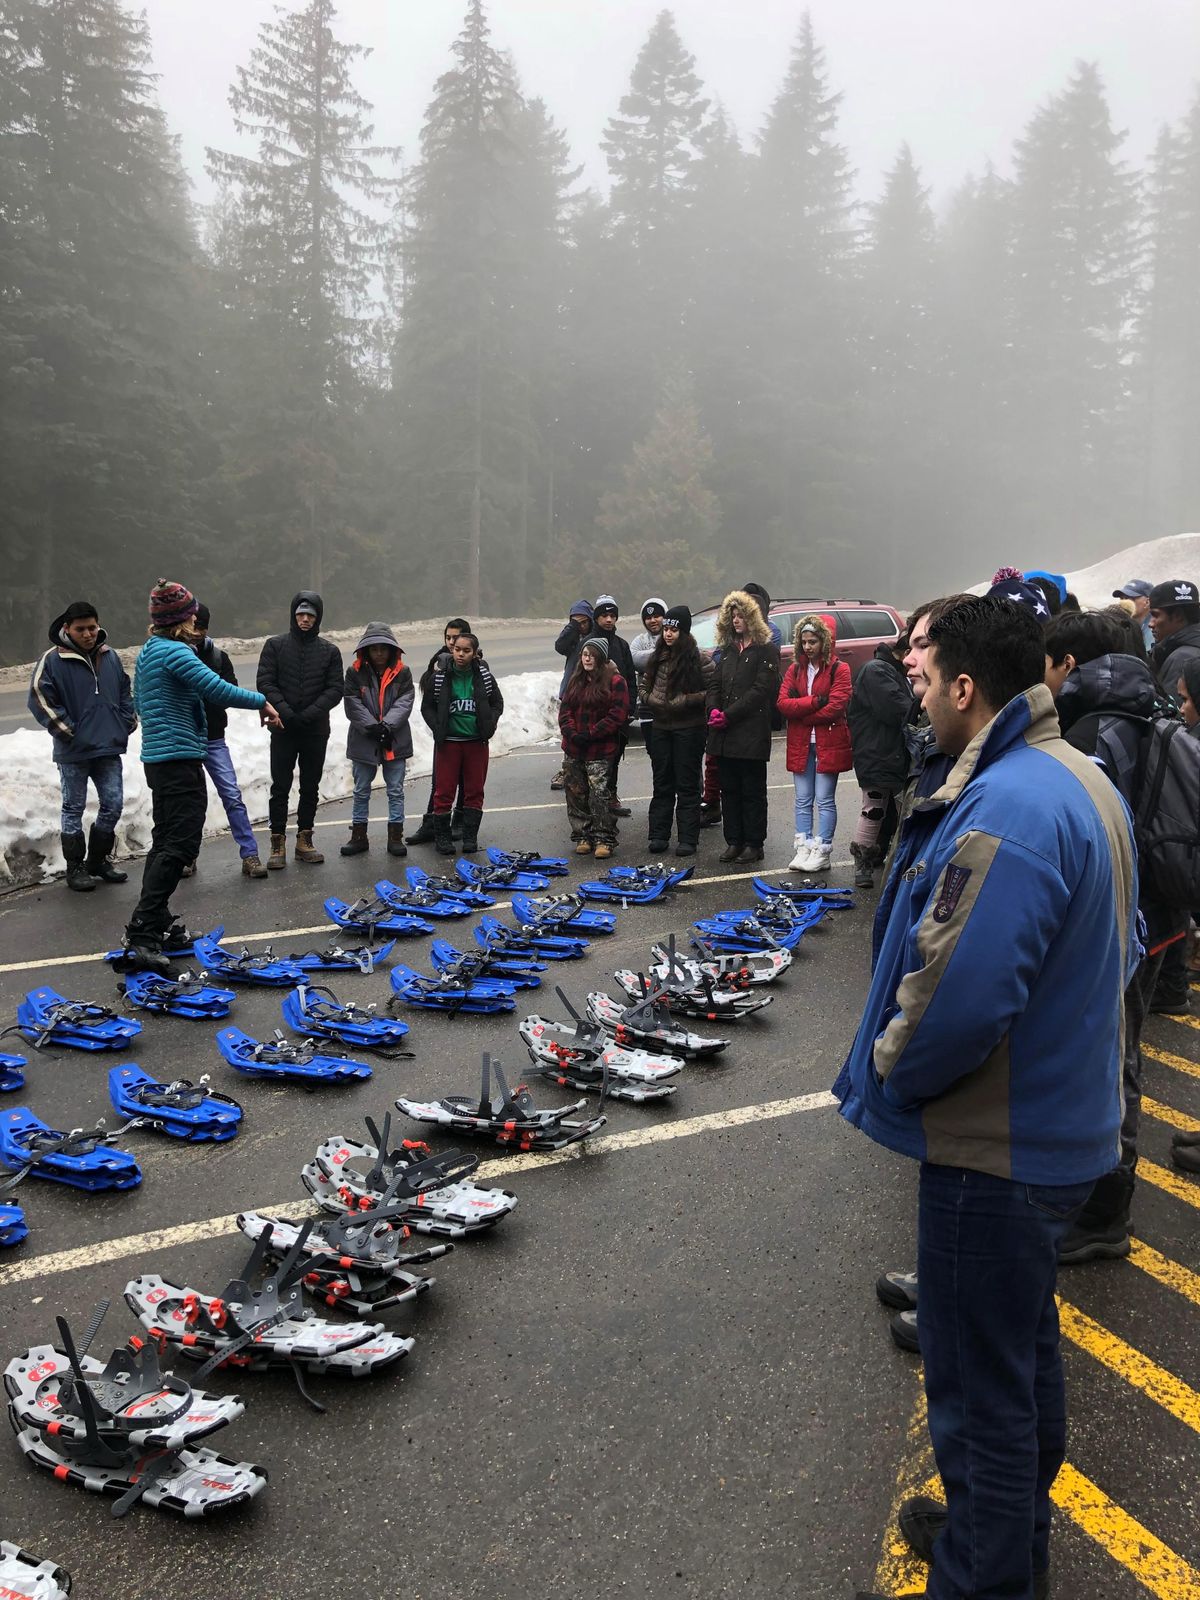 A Mt. Spokane High School class of immigrant and refugee children headed to Mount Spokane to learn some snow science, March 15. (Michelle Townshend / Courtesy)